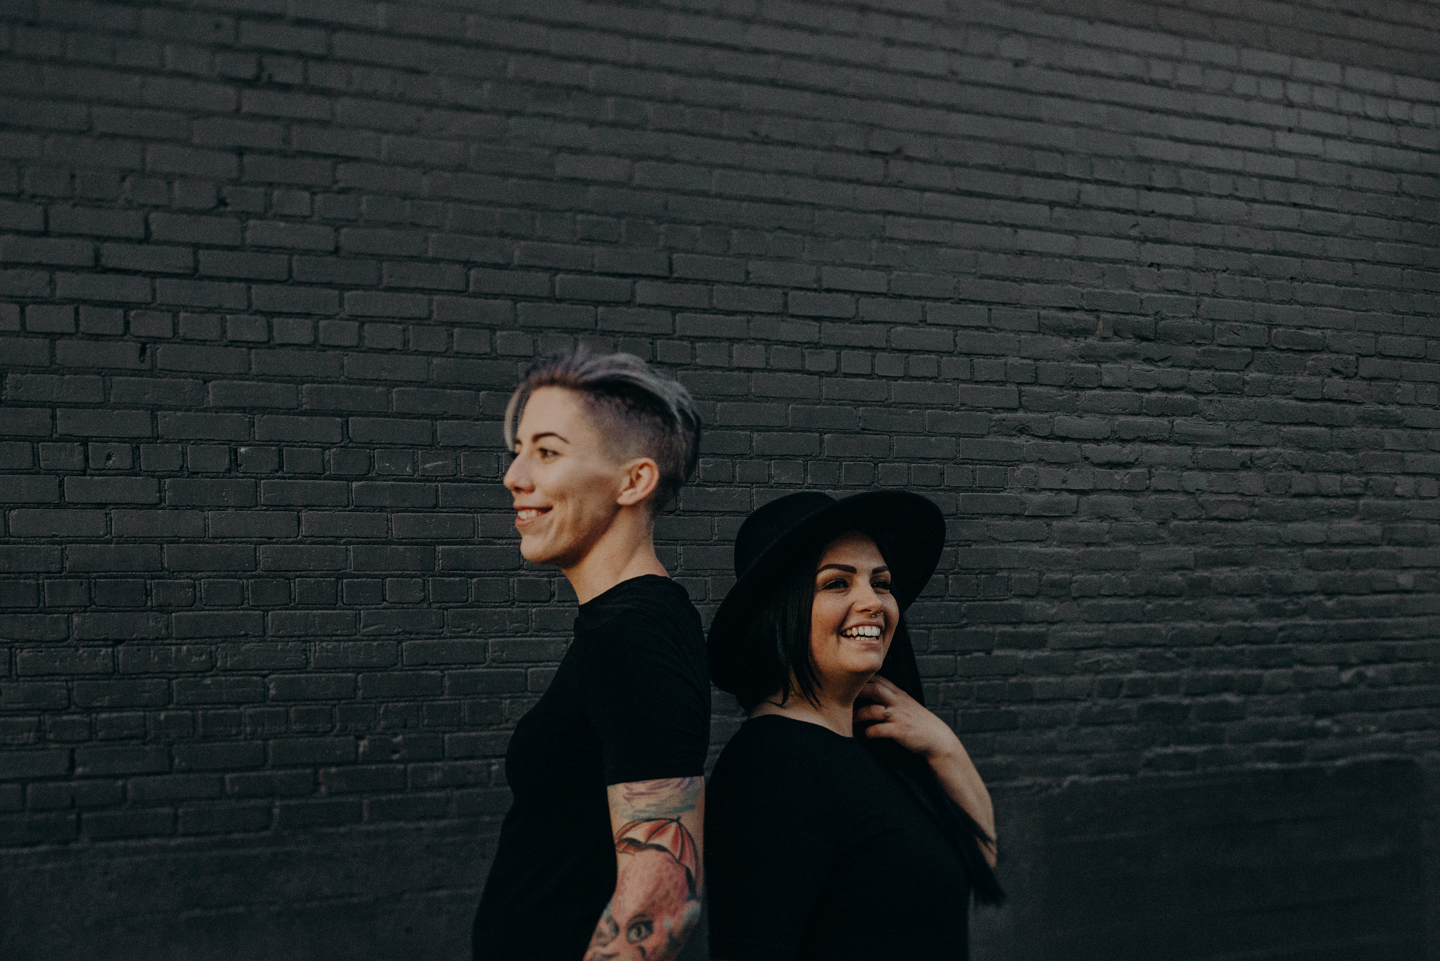 queer wedding photographer in los angeles - lesbian engagement session los angeles - isaiahandtaylor.com-033.jpg